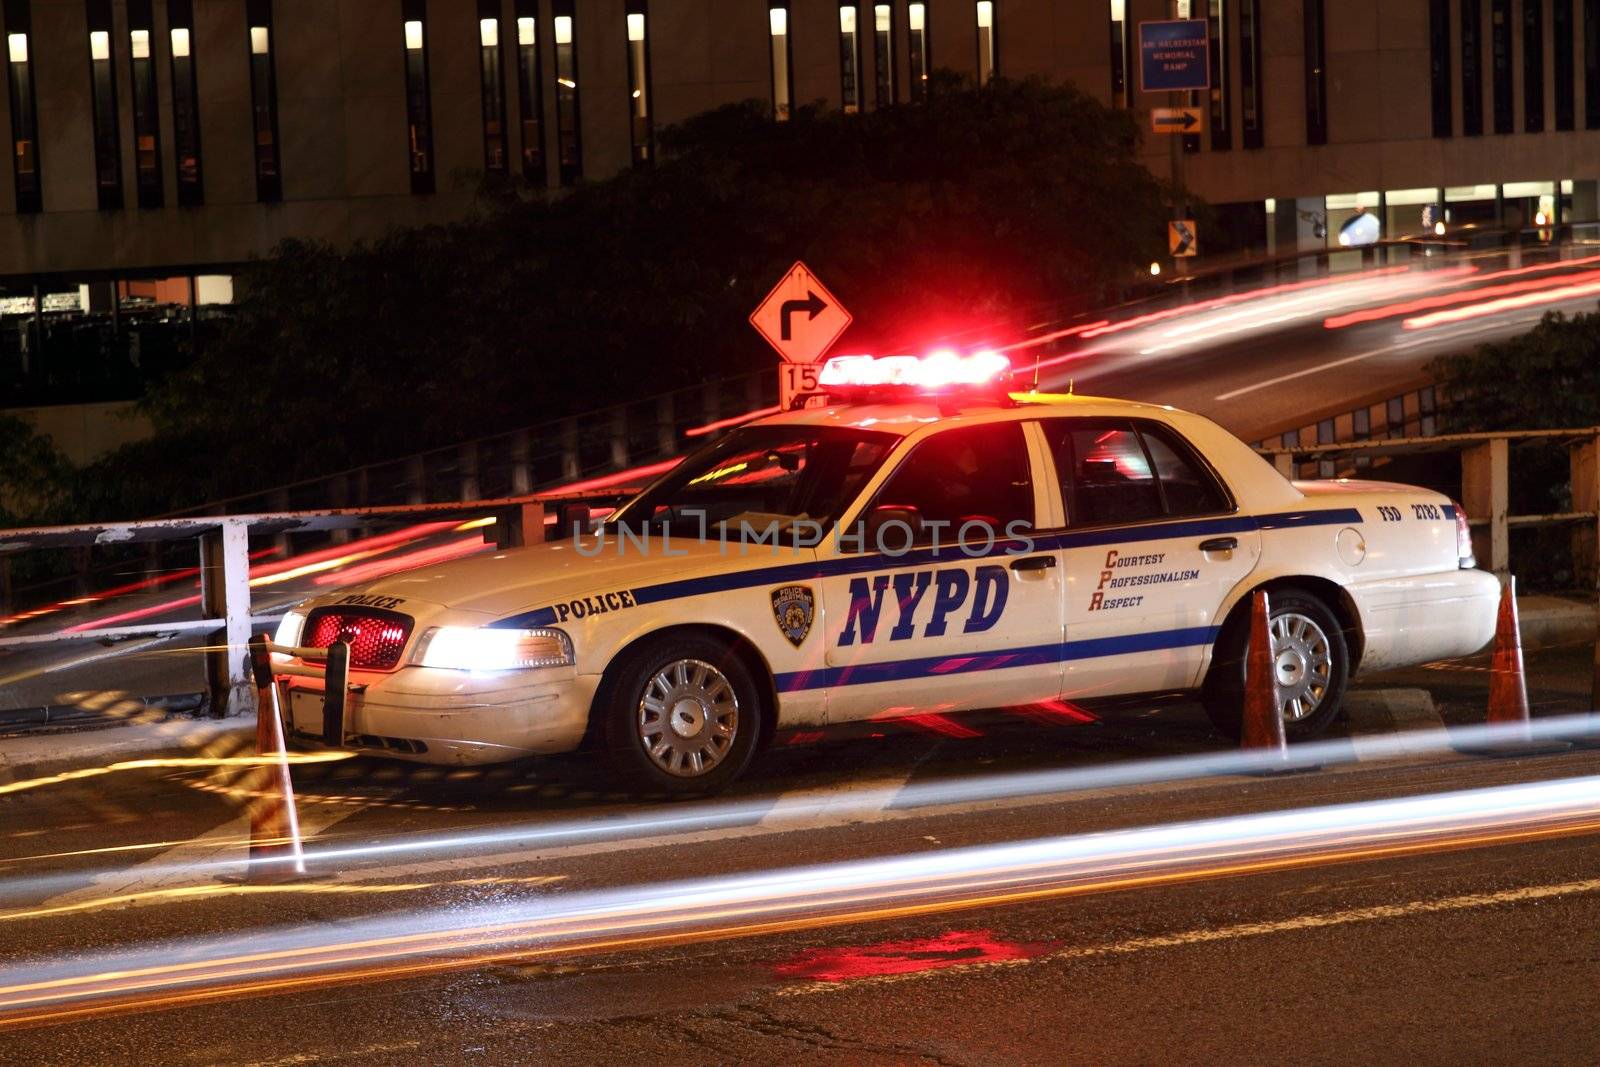 a police car in the night in New York City